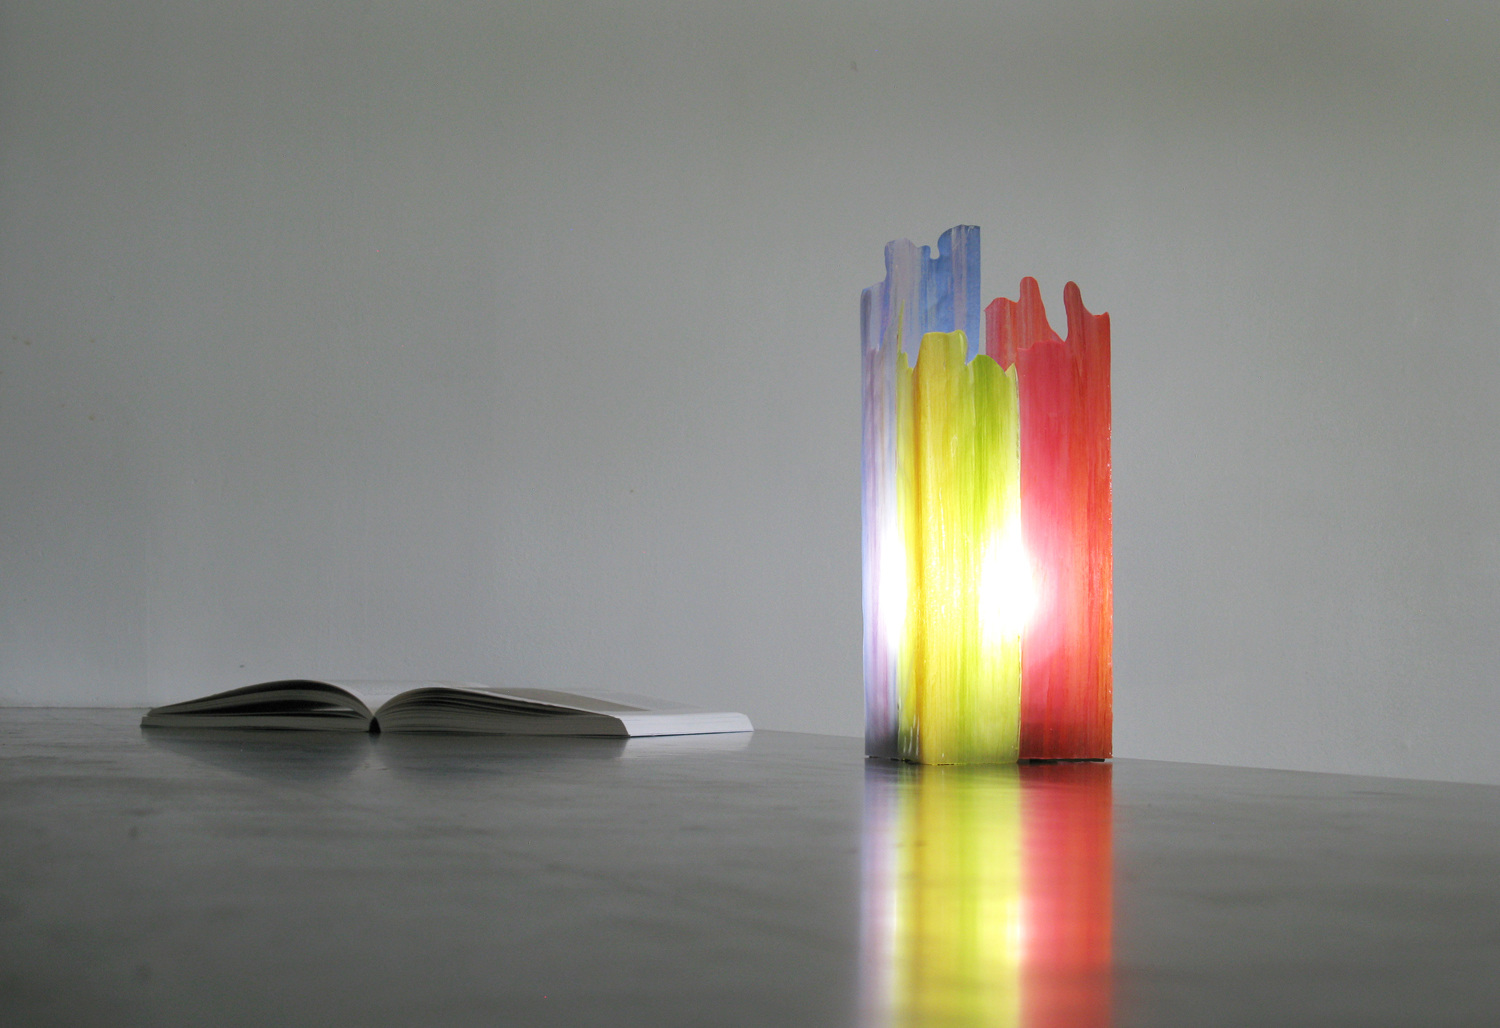 Painterly Spectrum Resin Table Lamps by Taeg Nishimoto